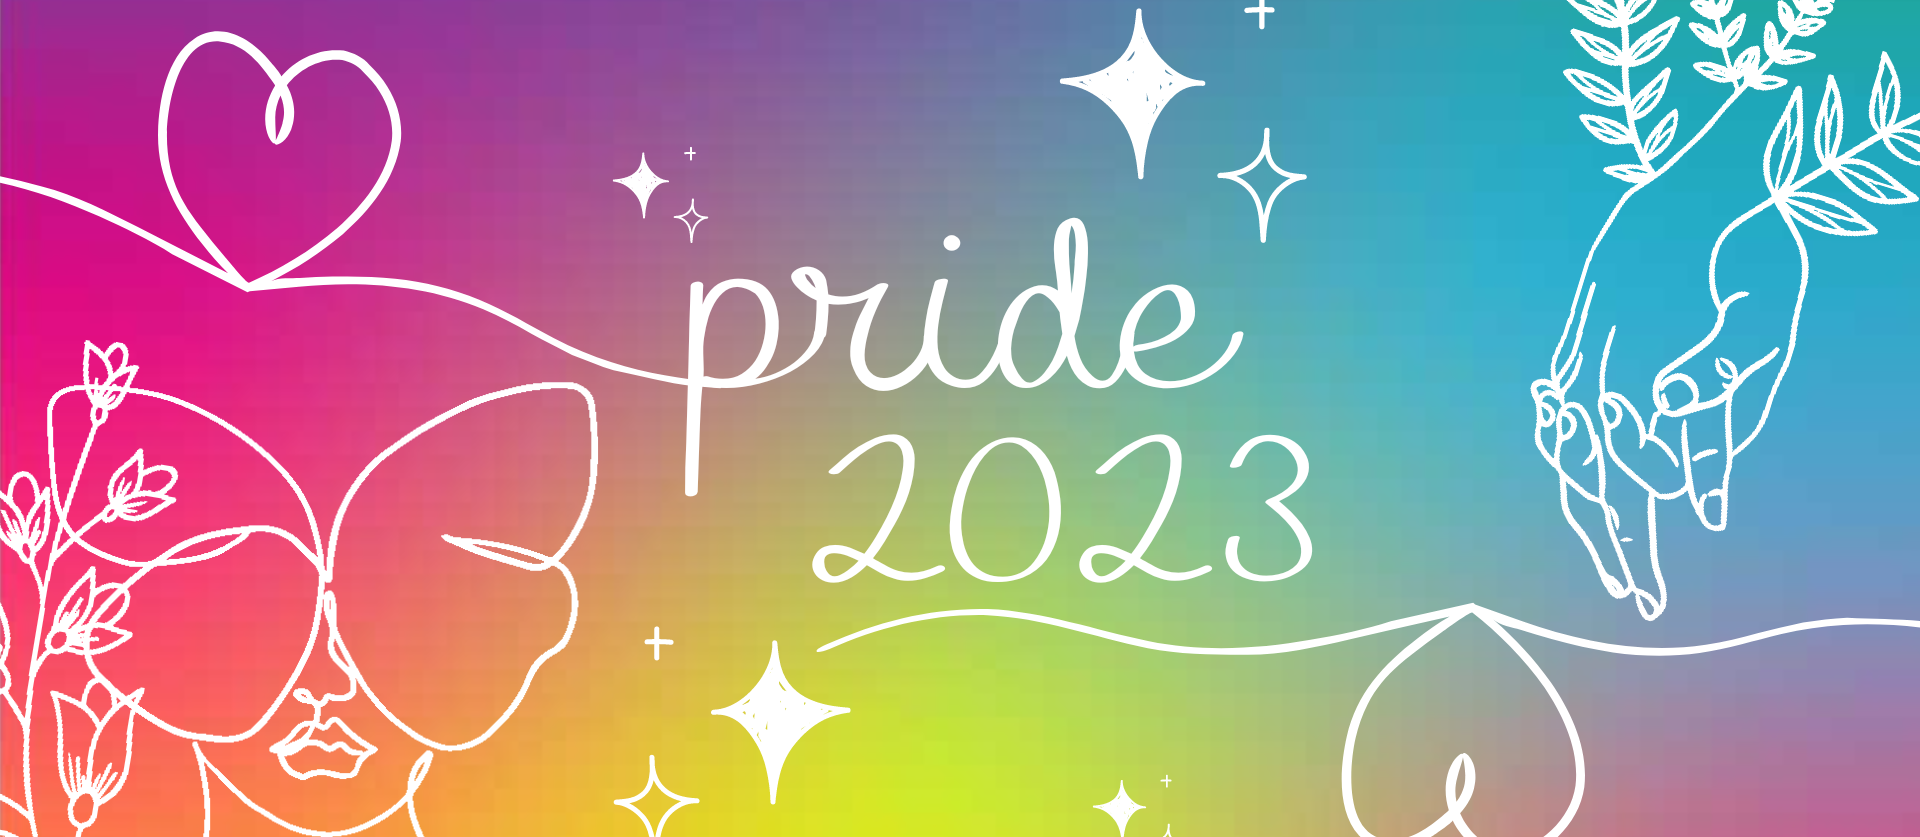 "Pride 2023" on rainbow background with white line drawings of hearts, sparkles, hands, and a person with butterfly eyes